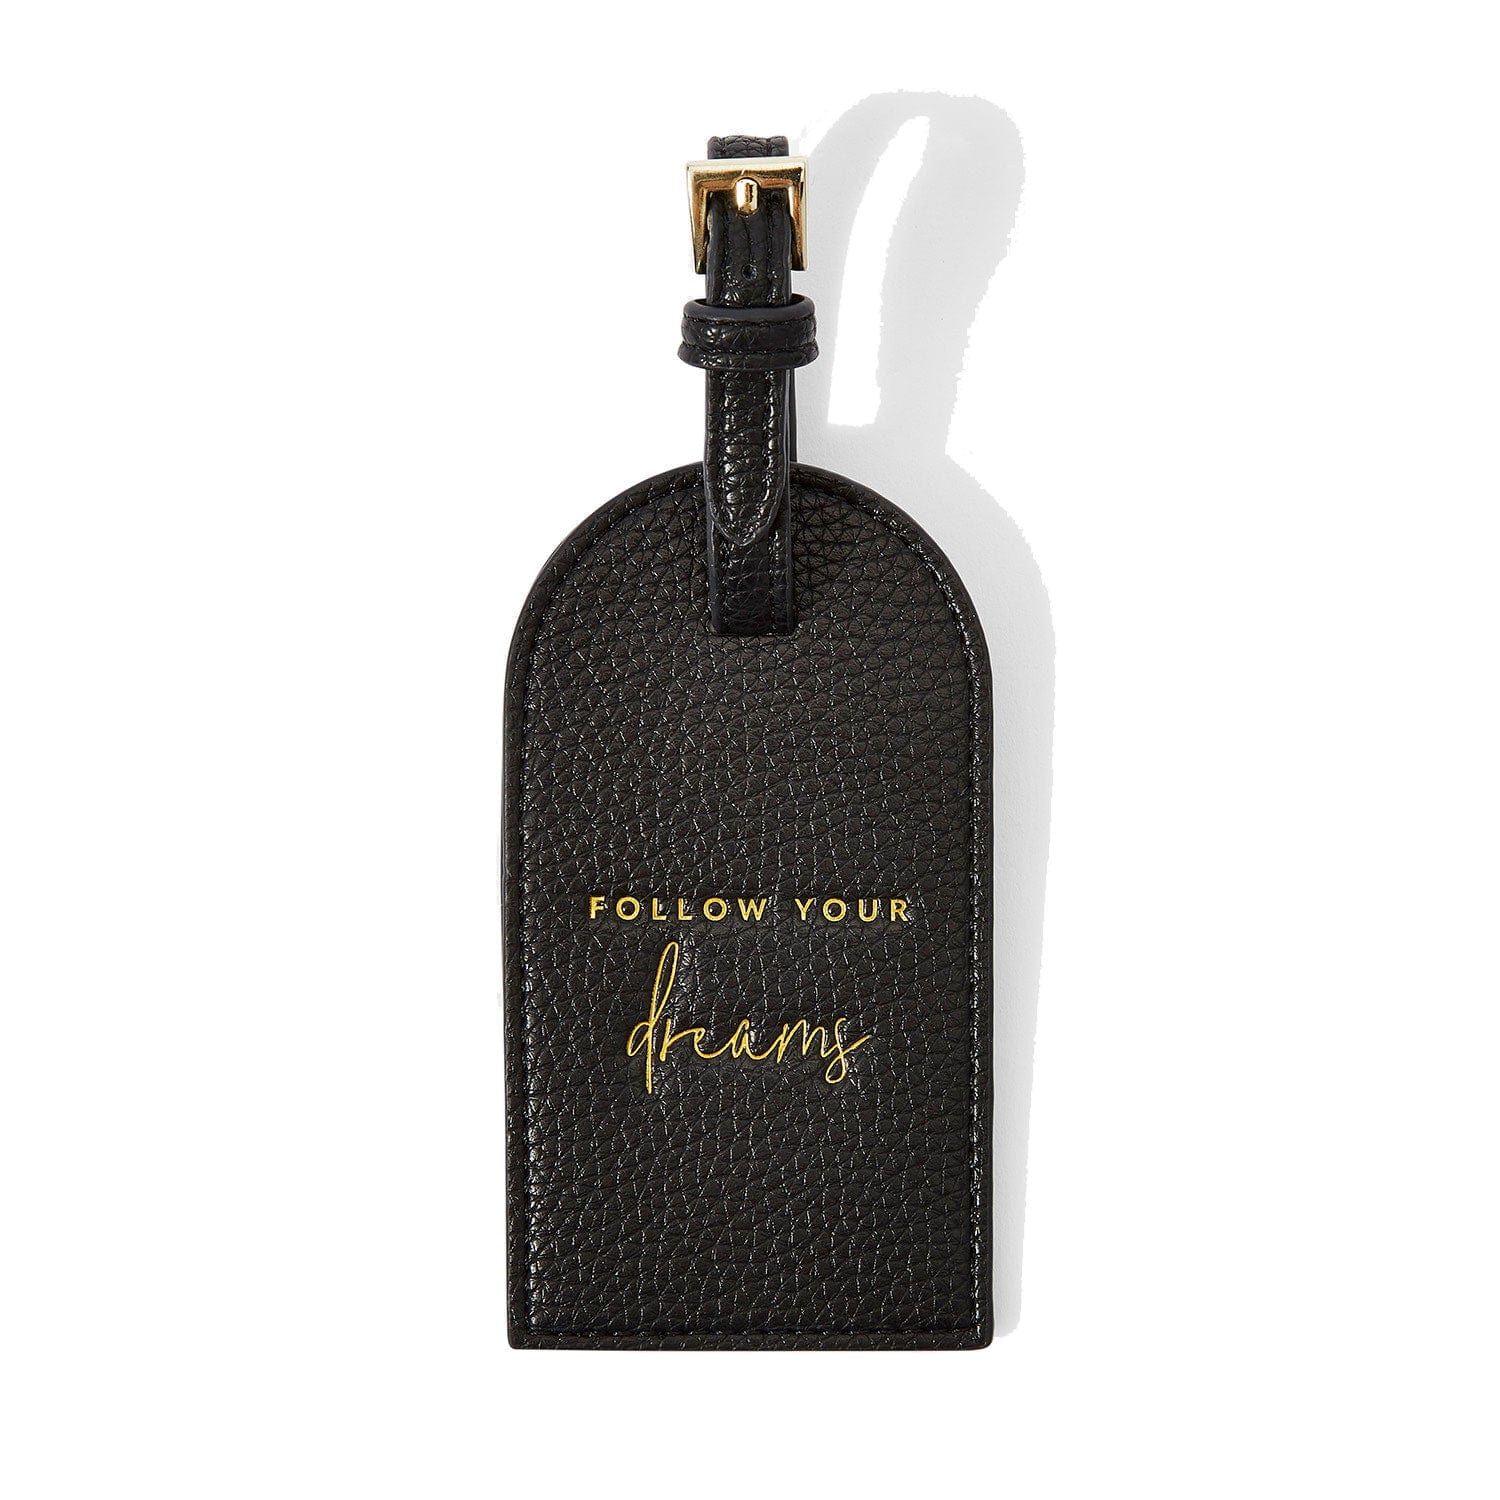 Katie Loxton Travel Accessories Katie Loxton Luggage Tag - Follow Your Dreams - Black